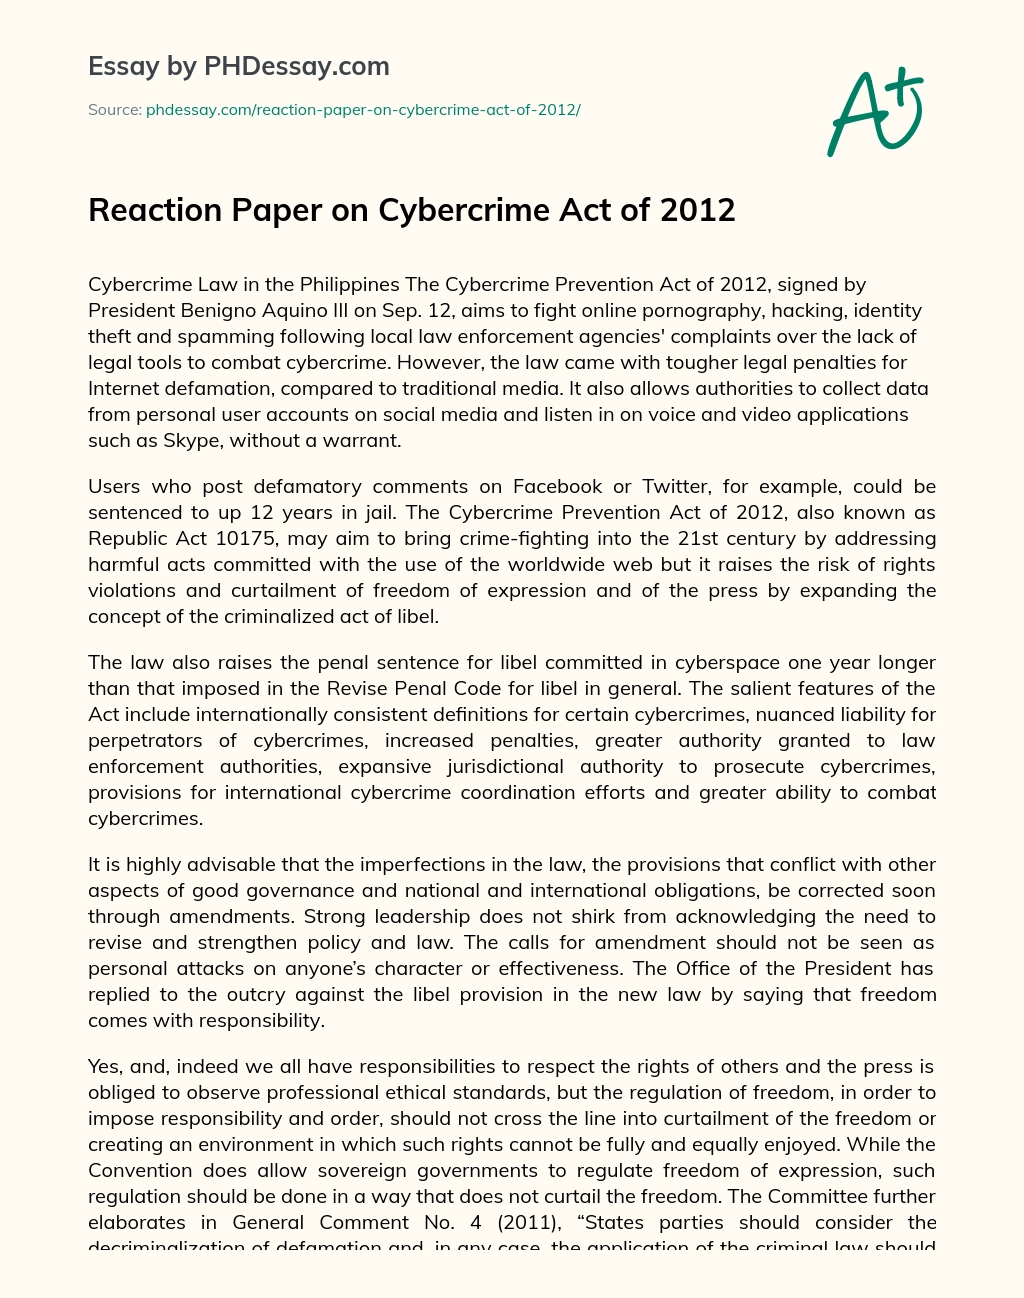 Reaction Paper on Cybercrime Act of 2012 essay